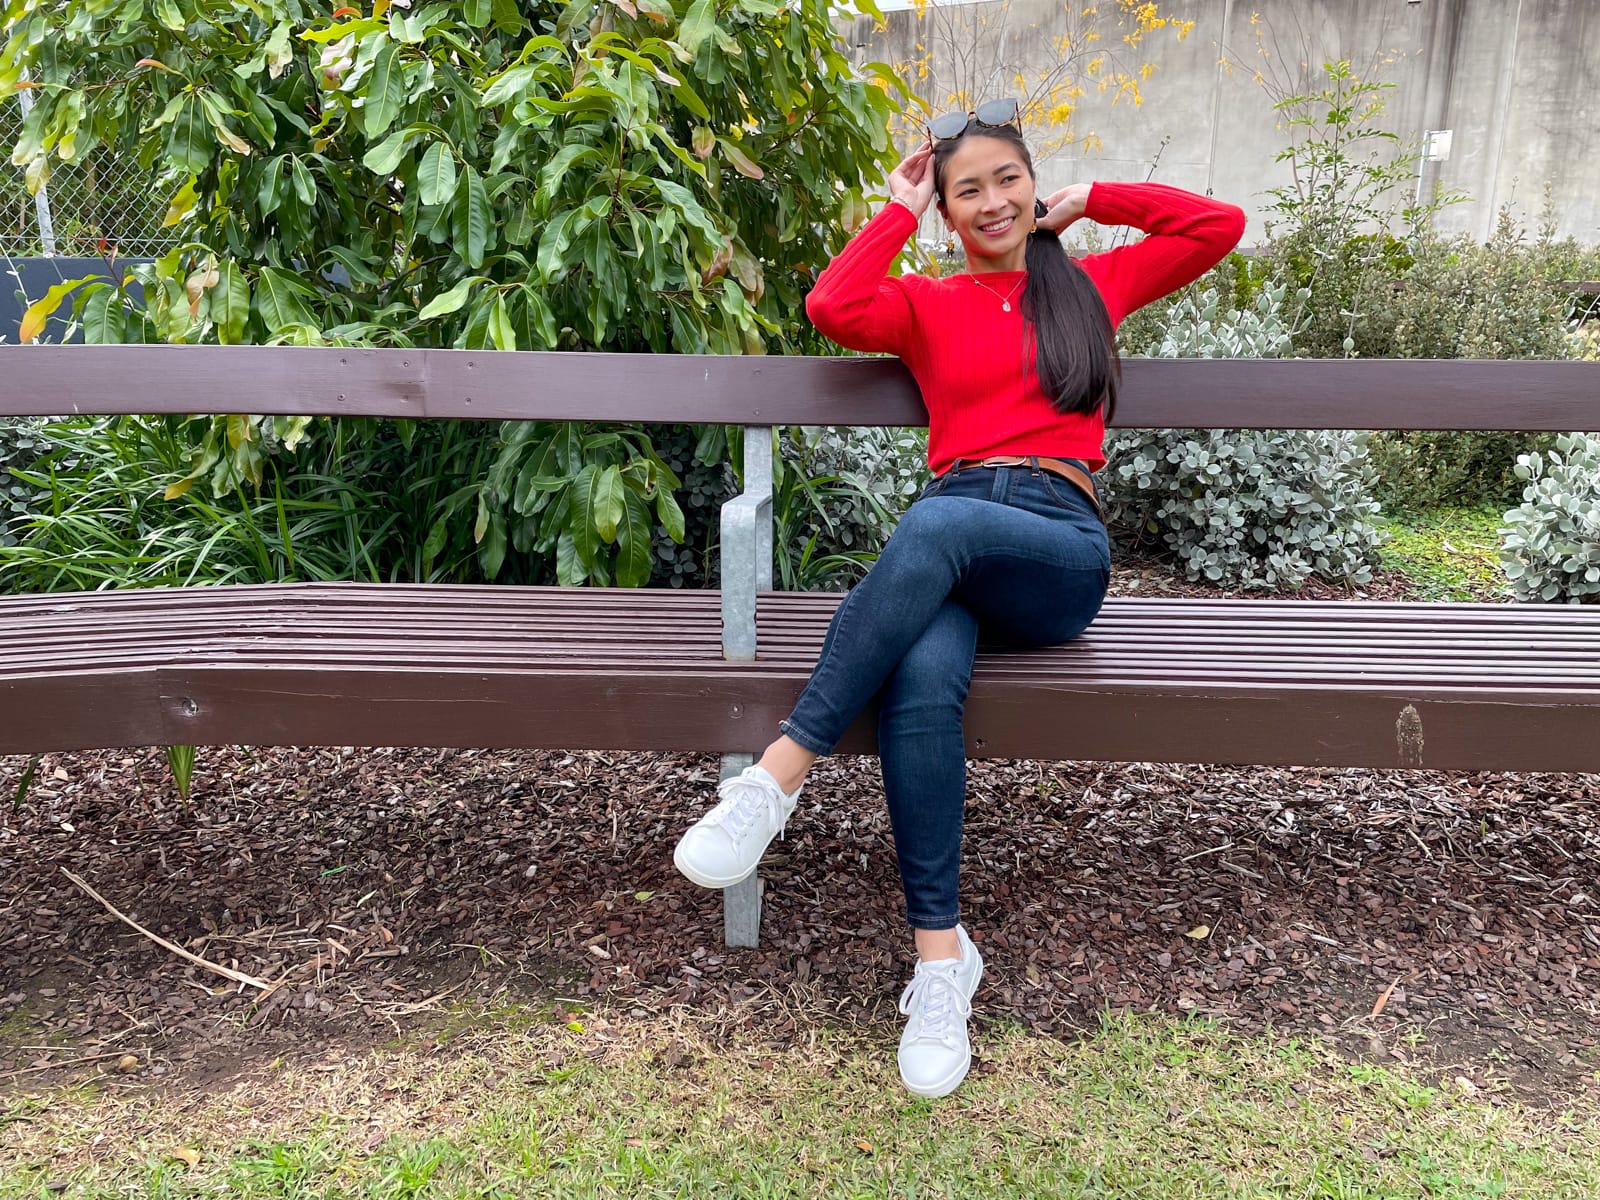 An Asian woman with long dark hair tied back in a low ponytail, sitting on a wooden park bench. She is wearing a red long-sleeved top and dark blue jeans, with white sneakers. She has her hands near her head and has tortoiseshell sunglasses on top of her head.